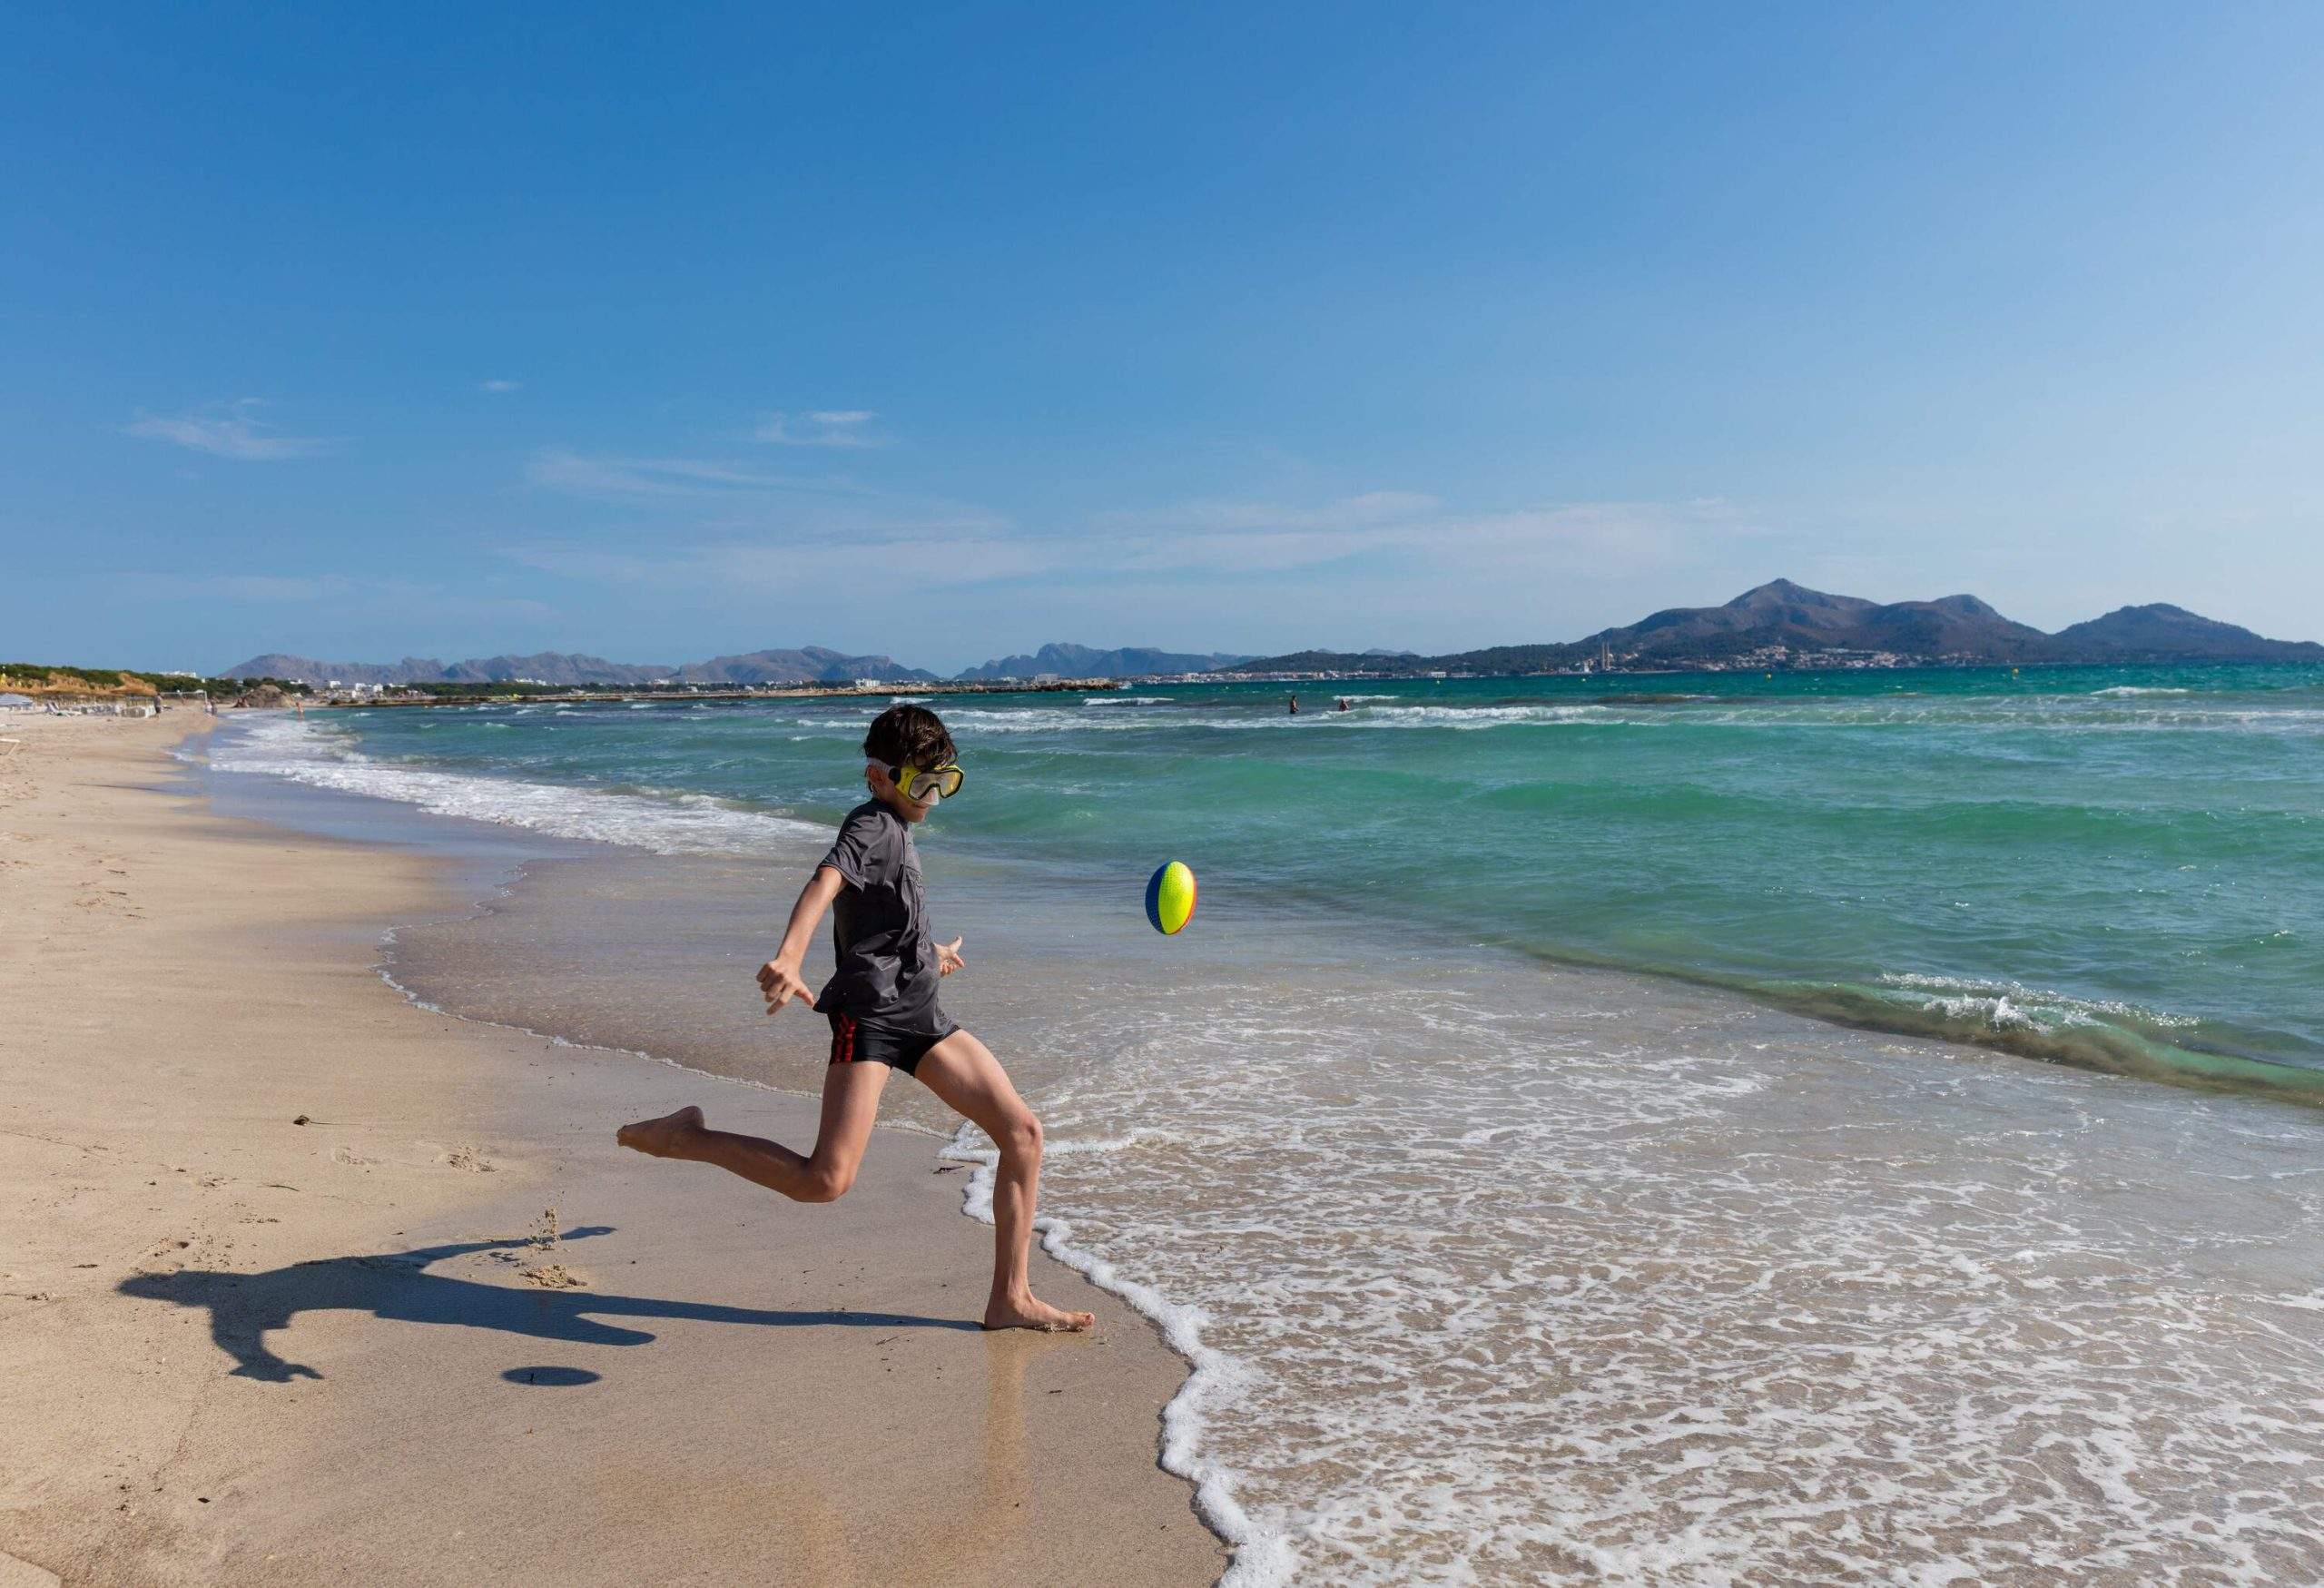 A little boy wearing goggles playing with a rugby ball on the beach.